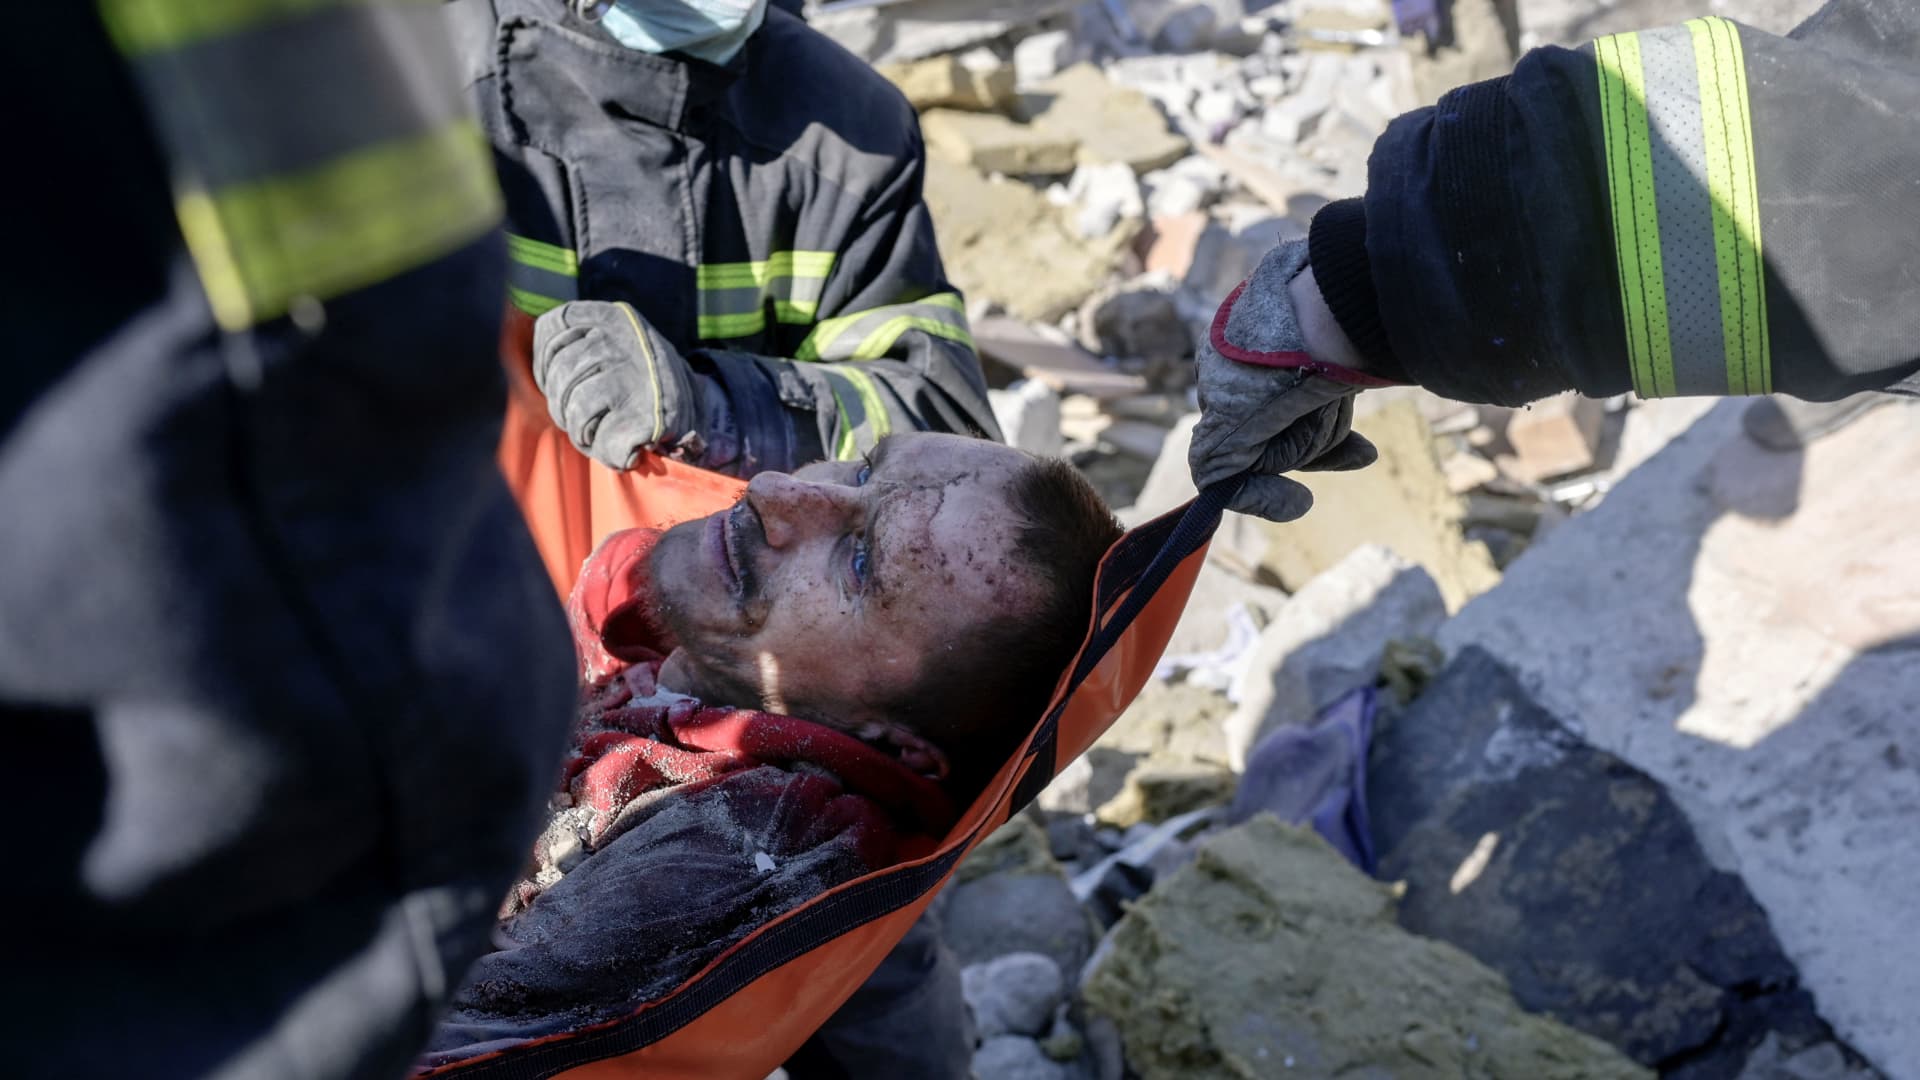 Rescuers carry a Ukrainian soldier saved after 30 hours from debris of the military school hit by Russian rockets, in Mykolaiv, southern Ukraine, on March 19, 2022.